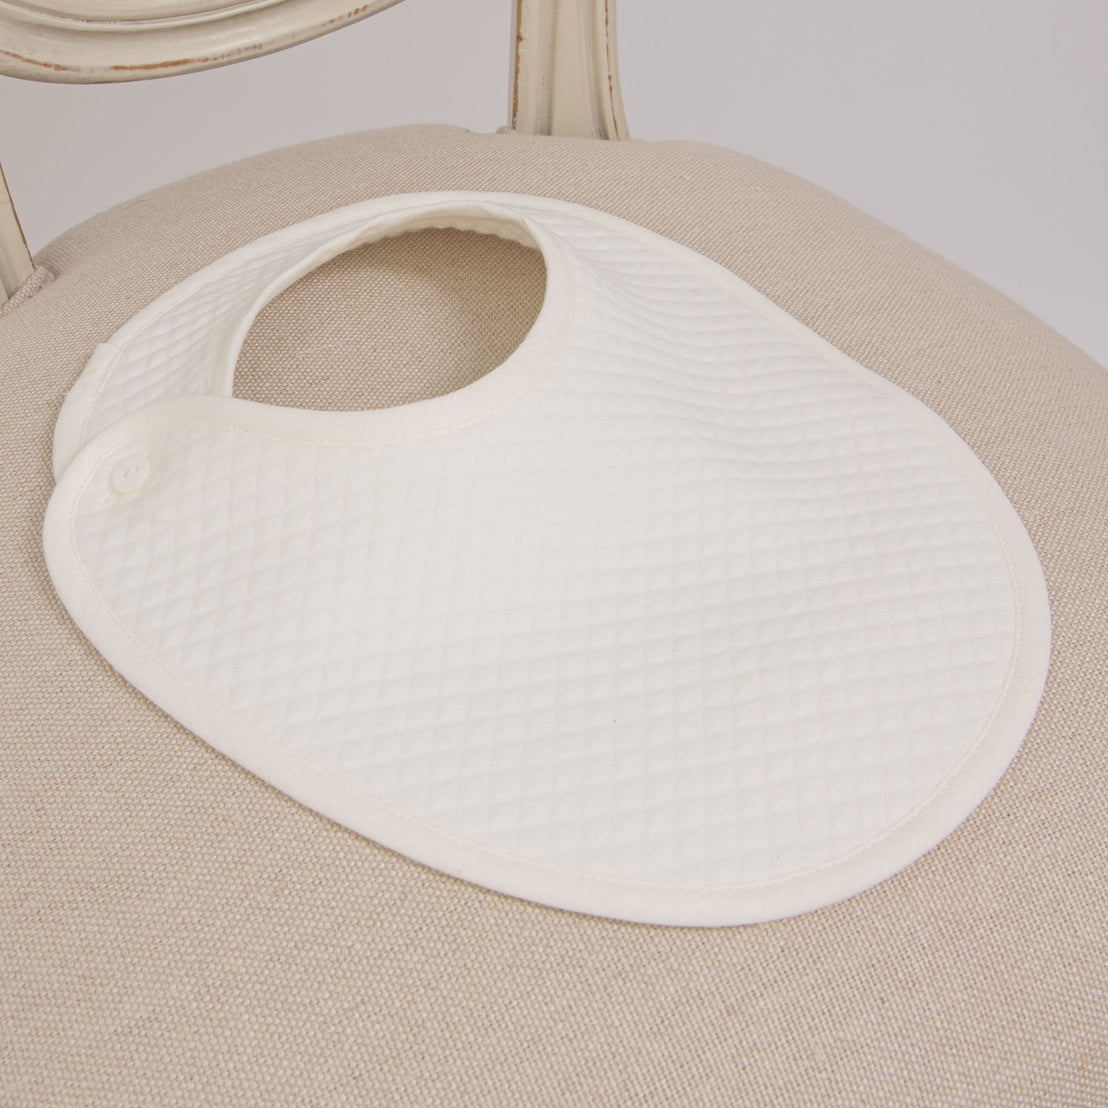 Flat lay photo of the Owen Bib on a chair. The Owen Bib is made out of ivory quilted cotton with an ivory linen trim and button closure.